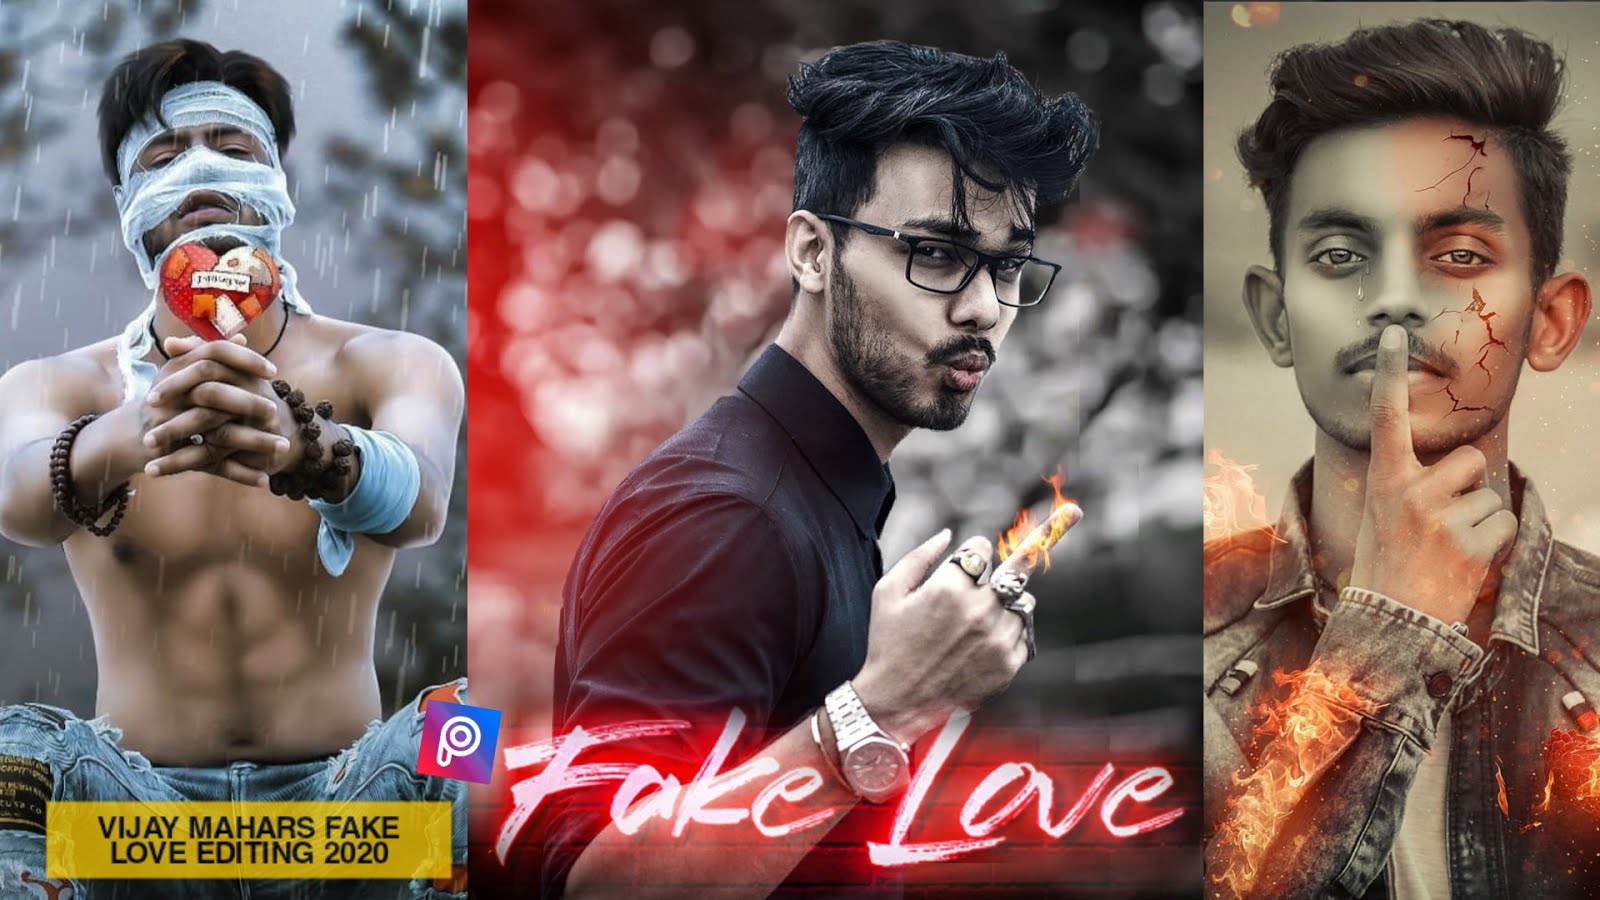 Fake love photo editing by learningwithsr 2020, Vijay mahar fake love photo  editing - LEARNINGWITHSR